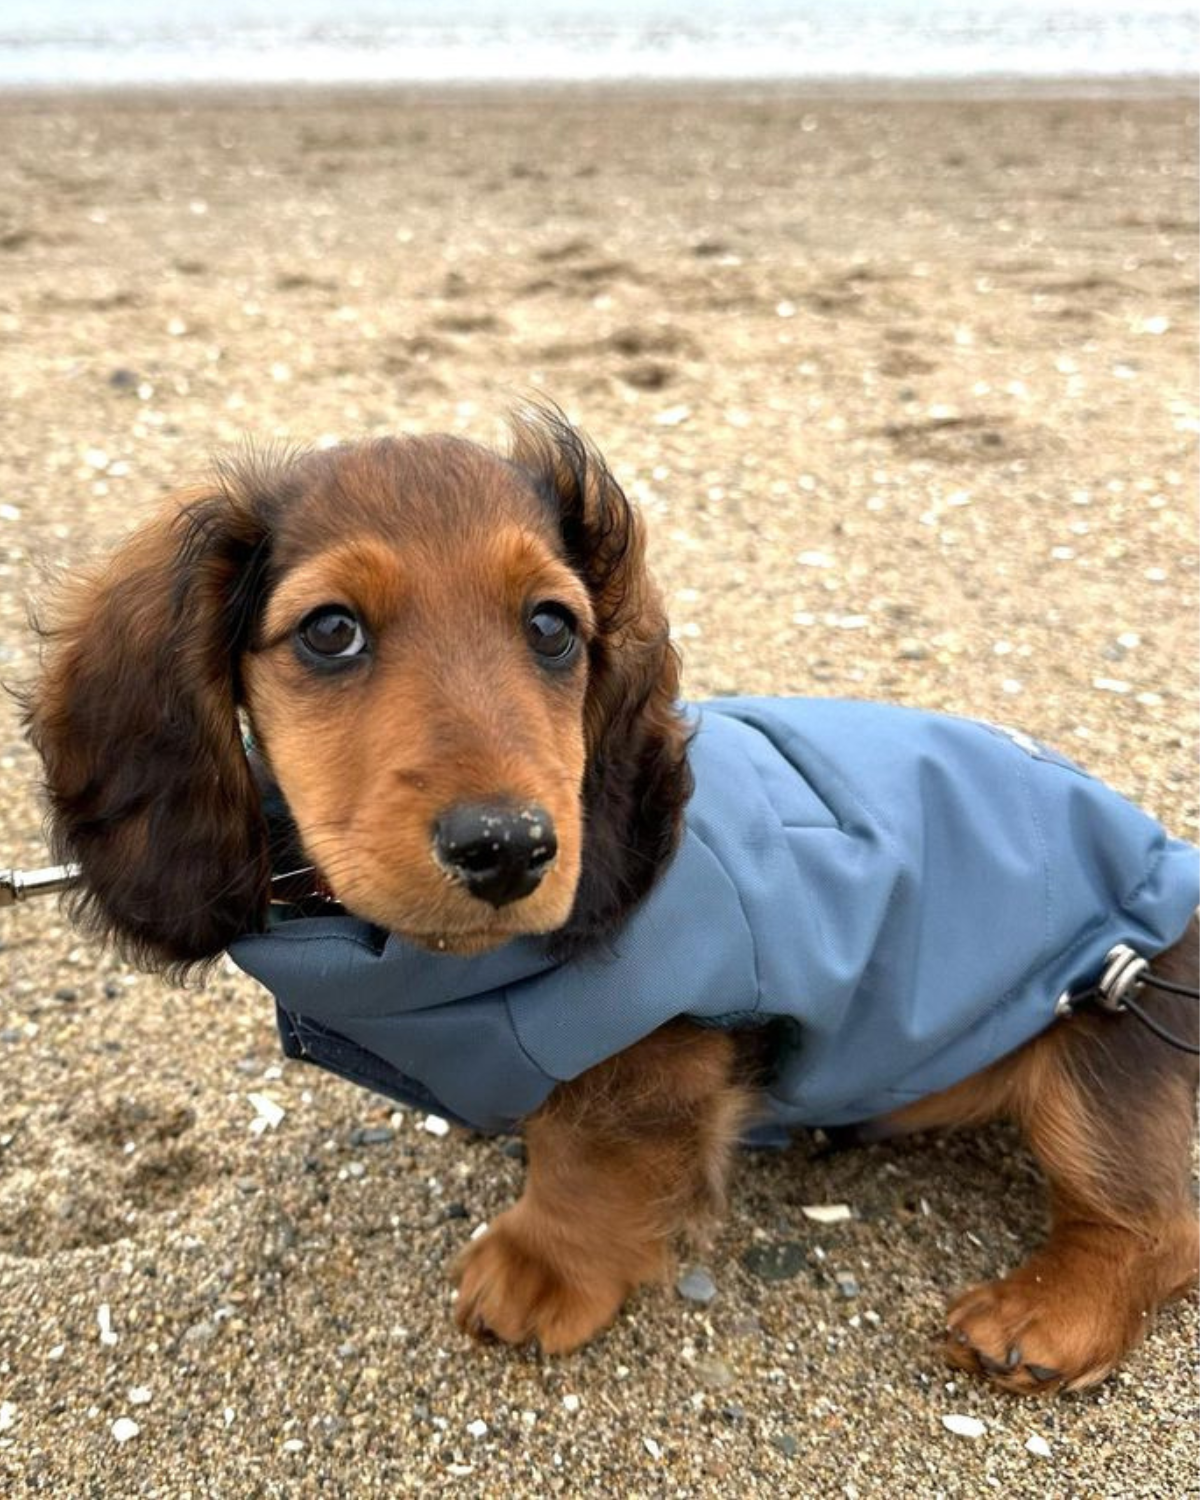 Adorable dachshund puppy Abe of @abethedachshund is wearing his DJANGO Reversible Puffer Dog Coat in color Twilight Blue. Abe is a mini doxie puppy and wears size XS. - djangobrand.com